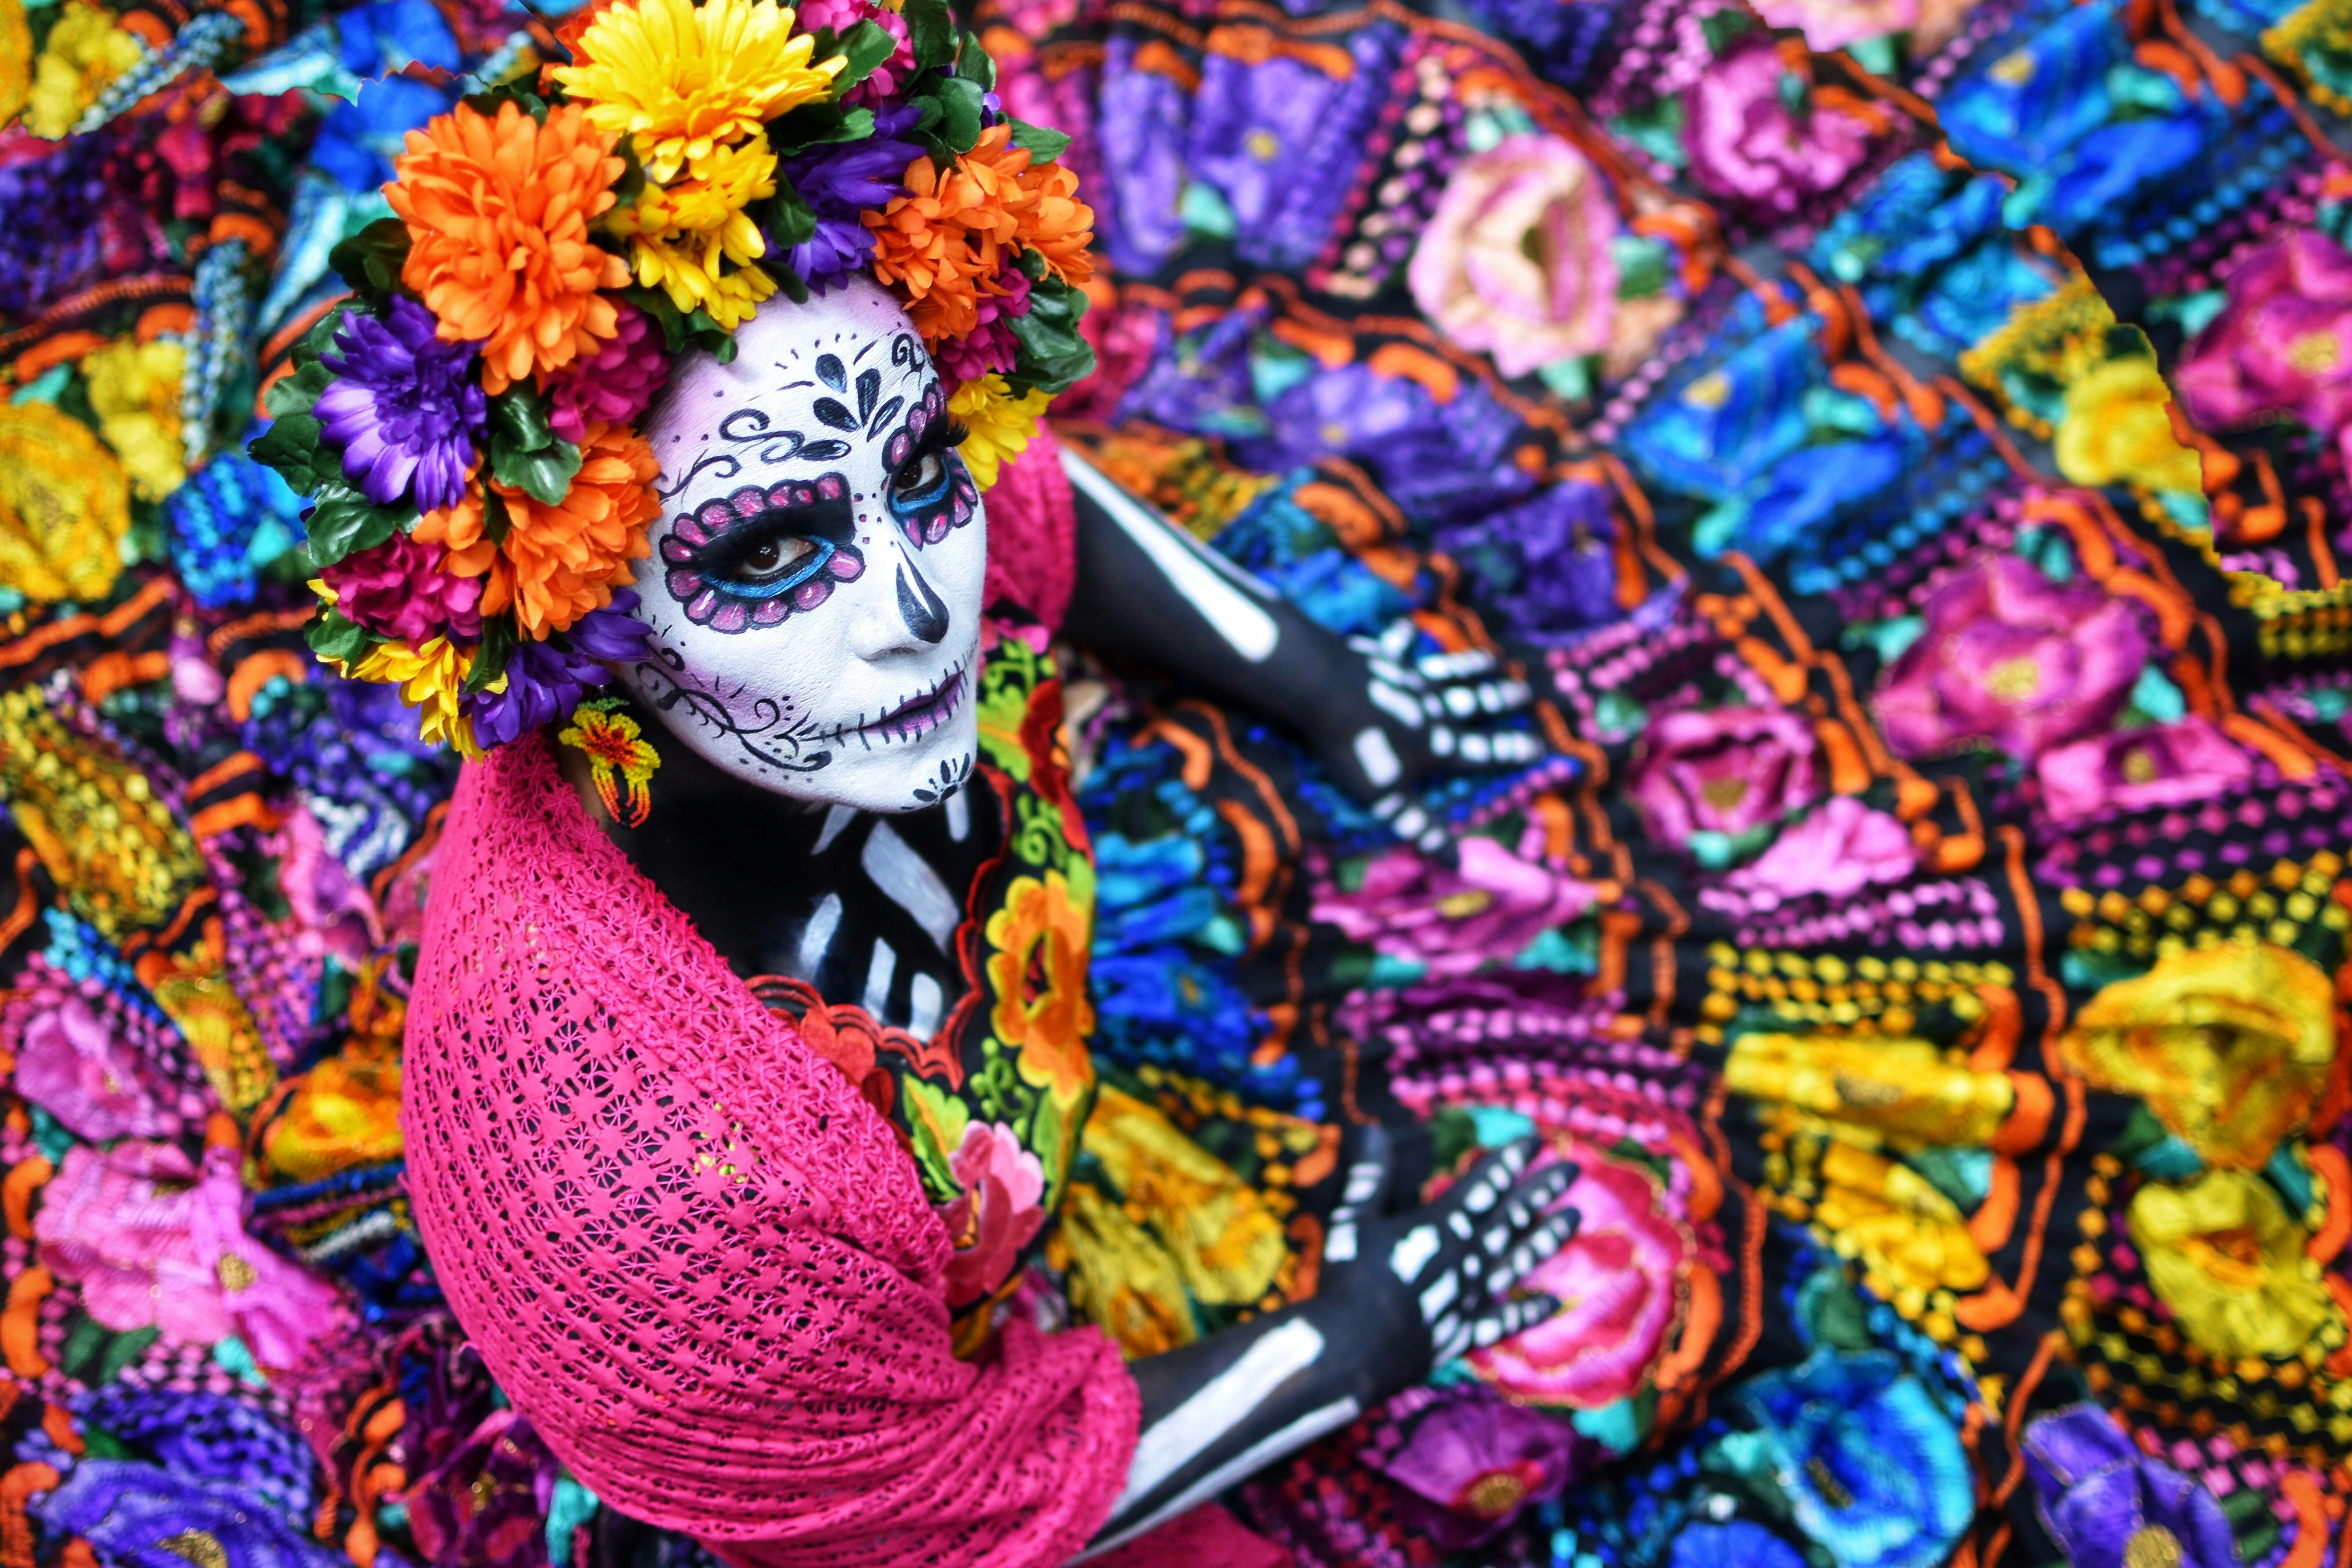 A woman dressed as a Catrina with a white-painted face with black flower patterns, and a flower-covered headdress